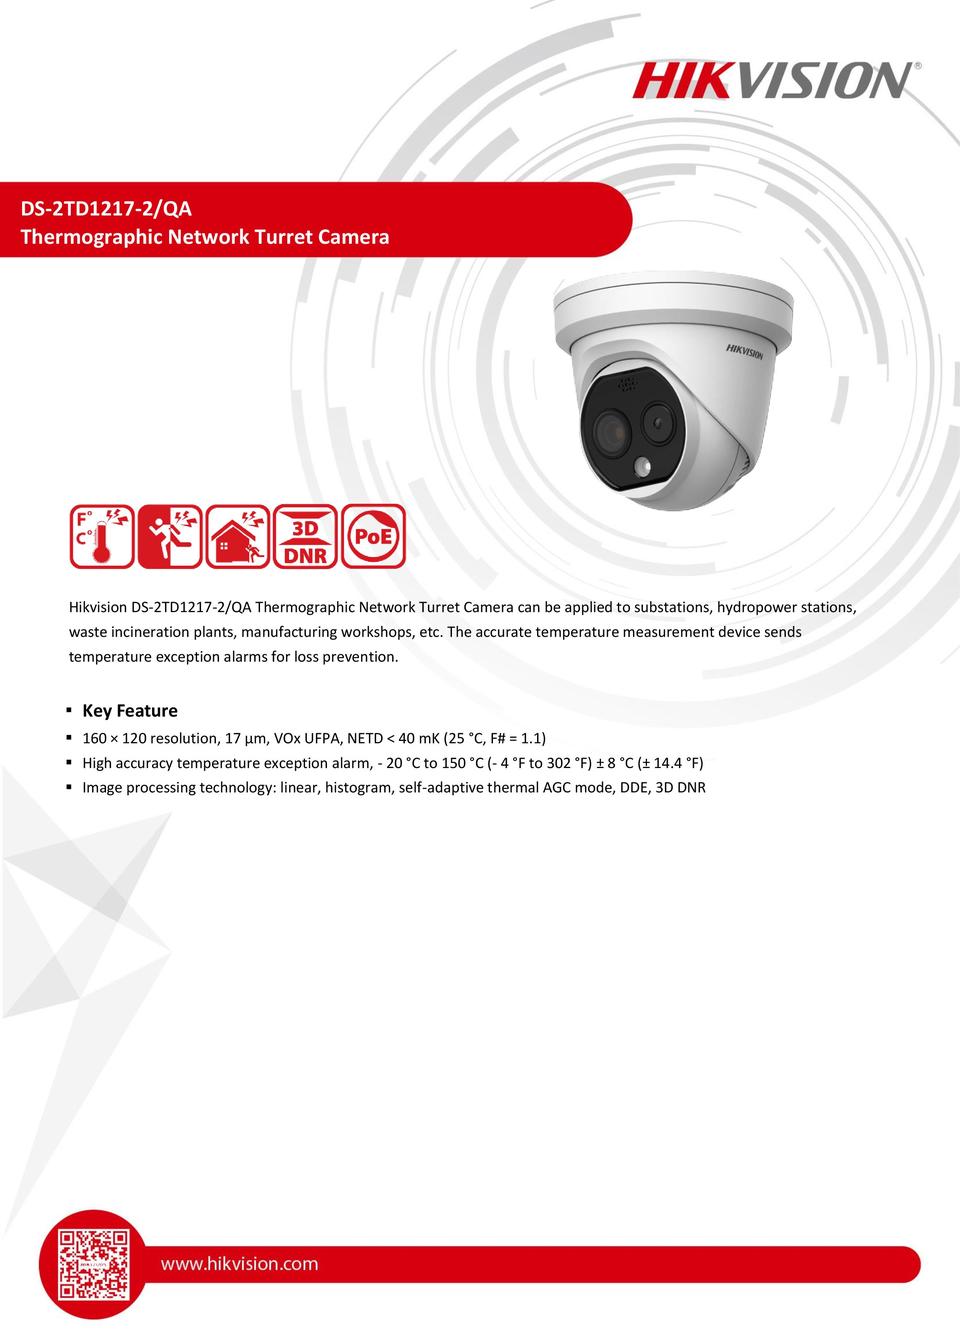 Hikvision DS-2TD1217-2/QA 4MP Thermal & Optical Bi-Spectrum Network Turret Camera with 2mm Lens 0